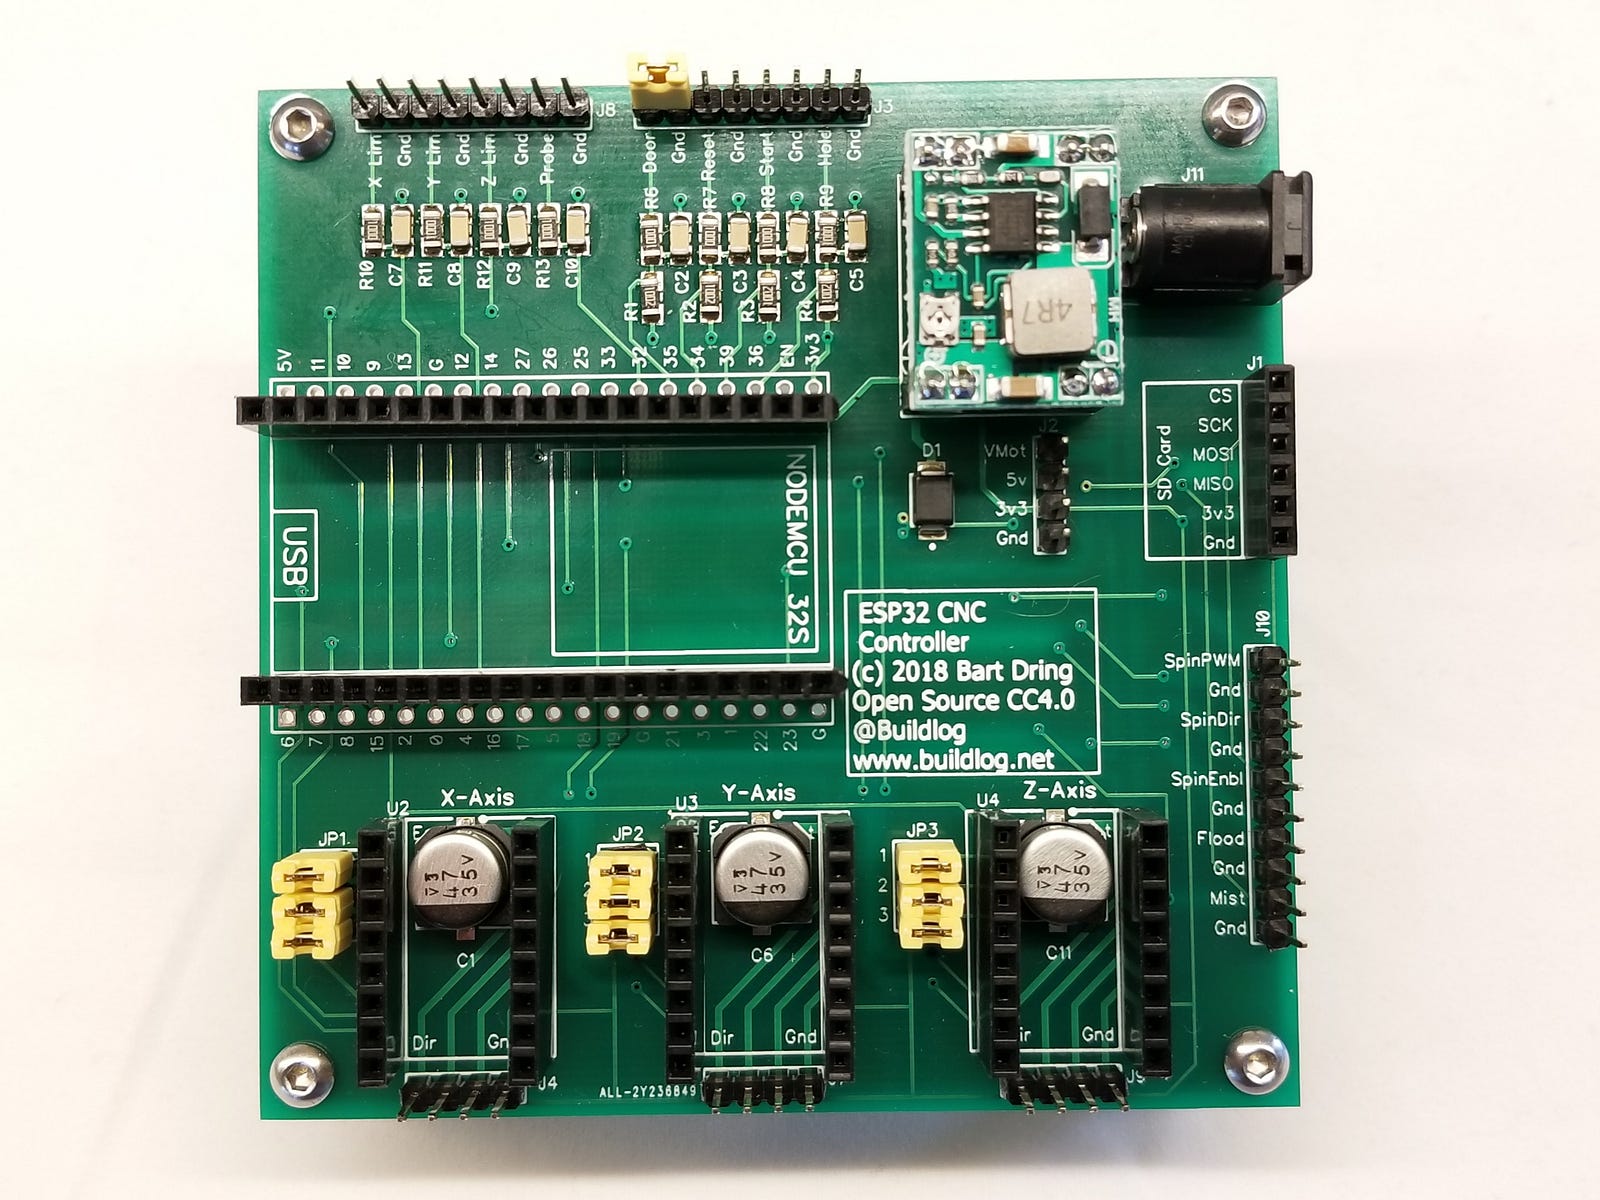 The Updated Esp32 Based Grbl Cnc Control Board Is Now For Sale